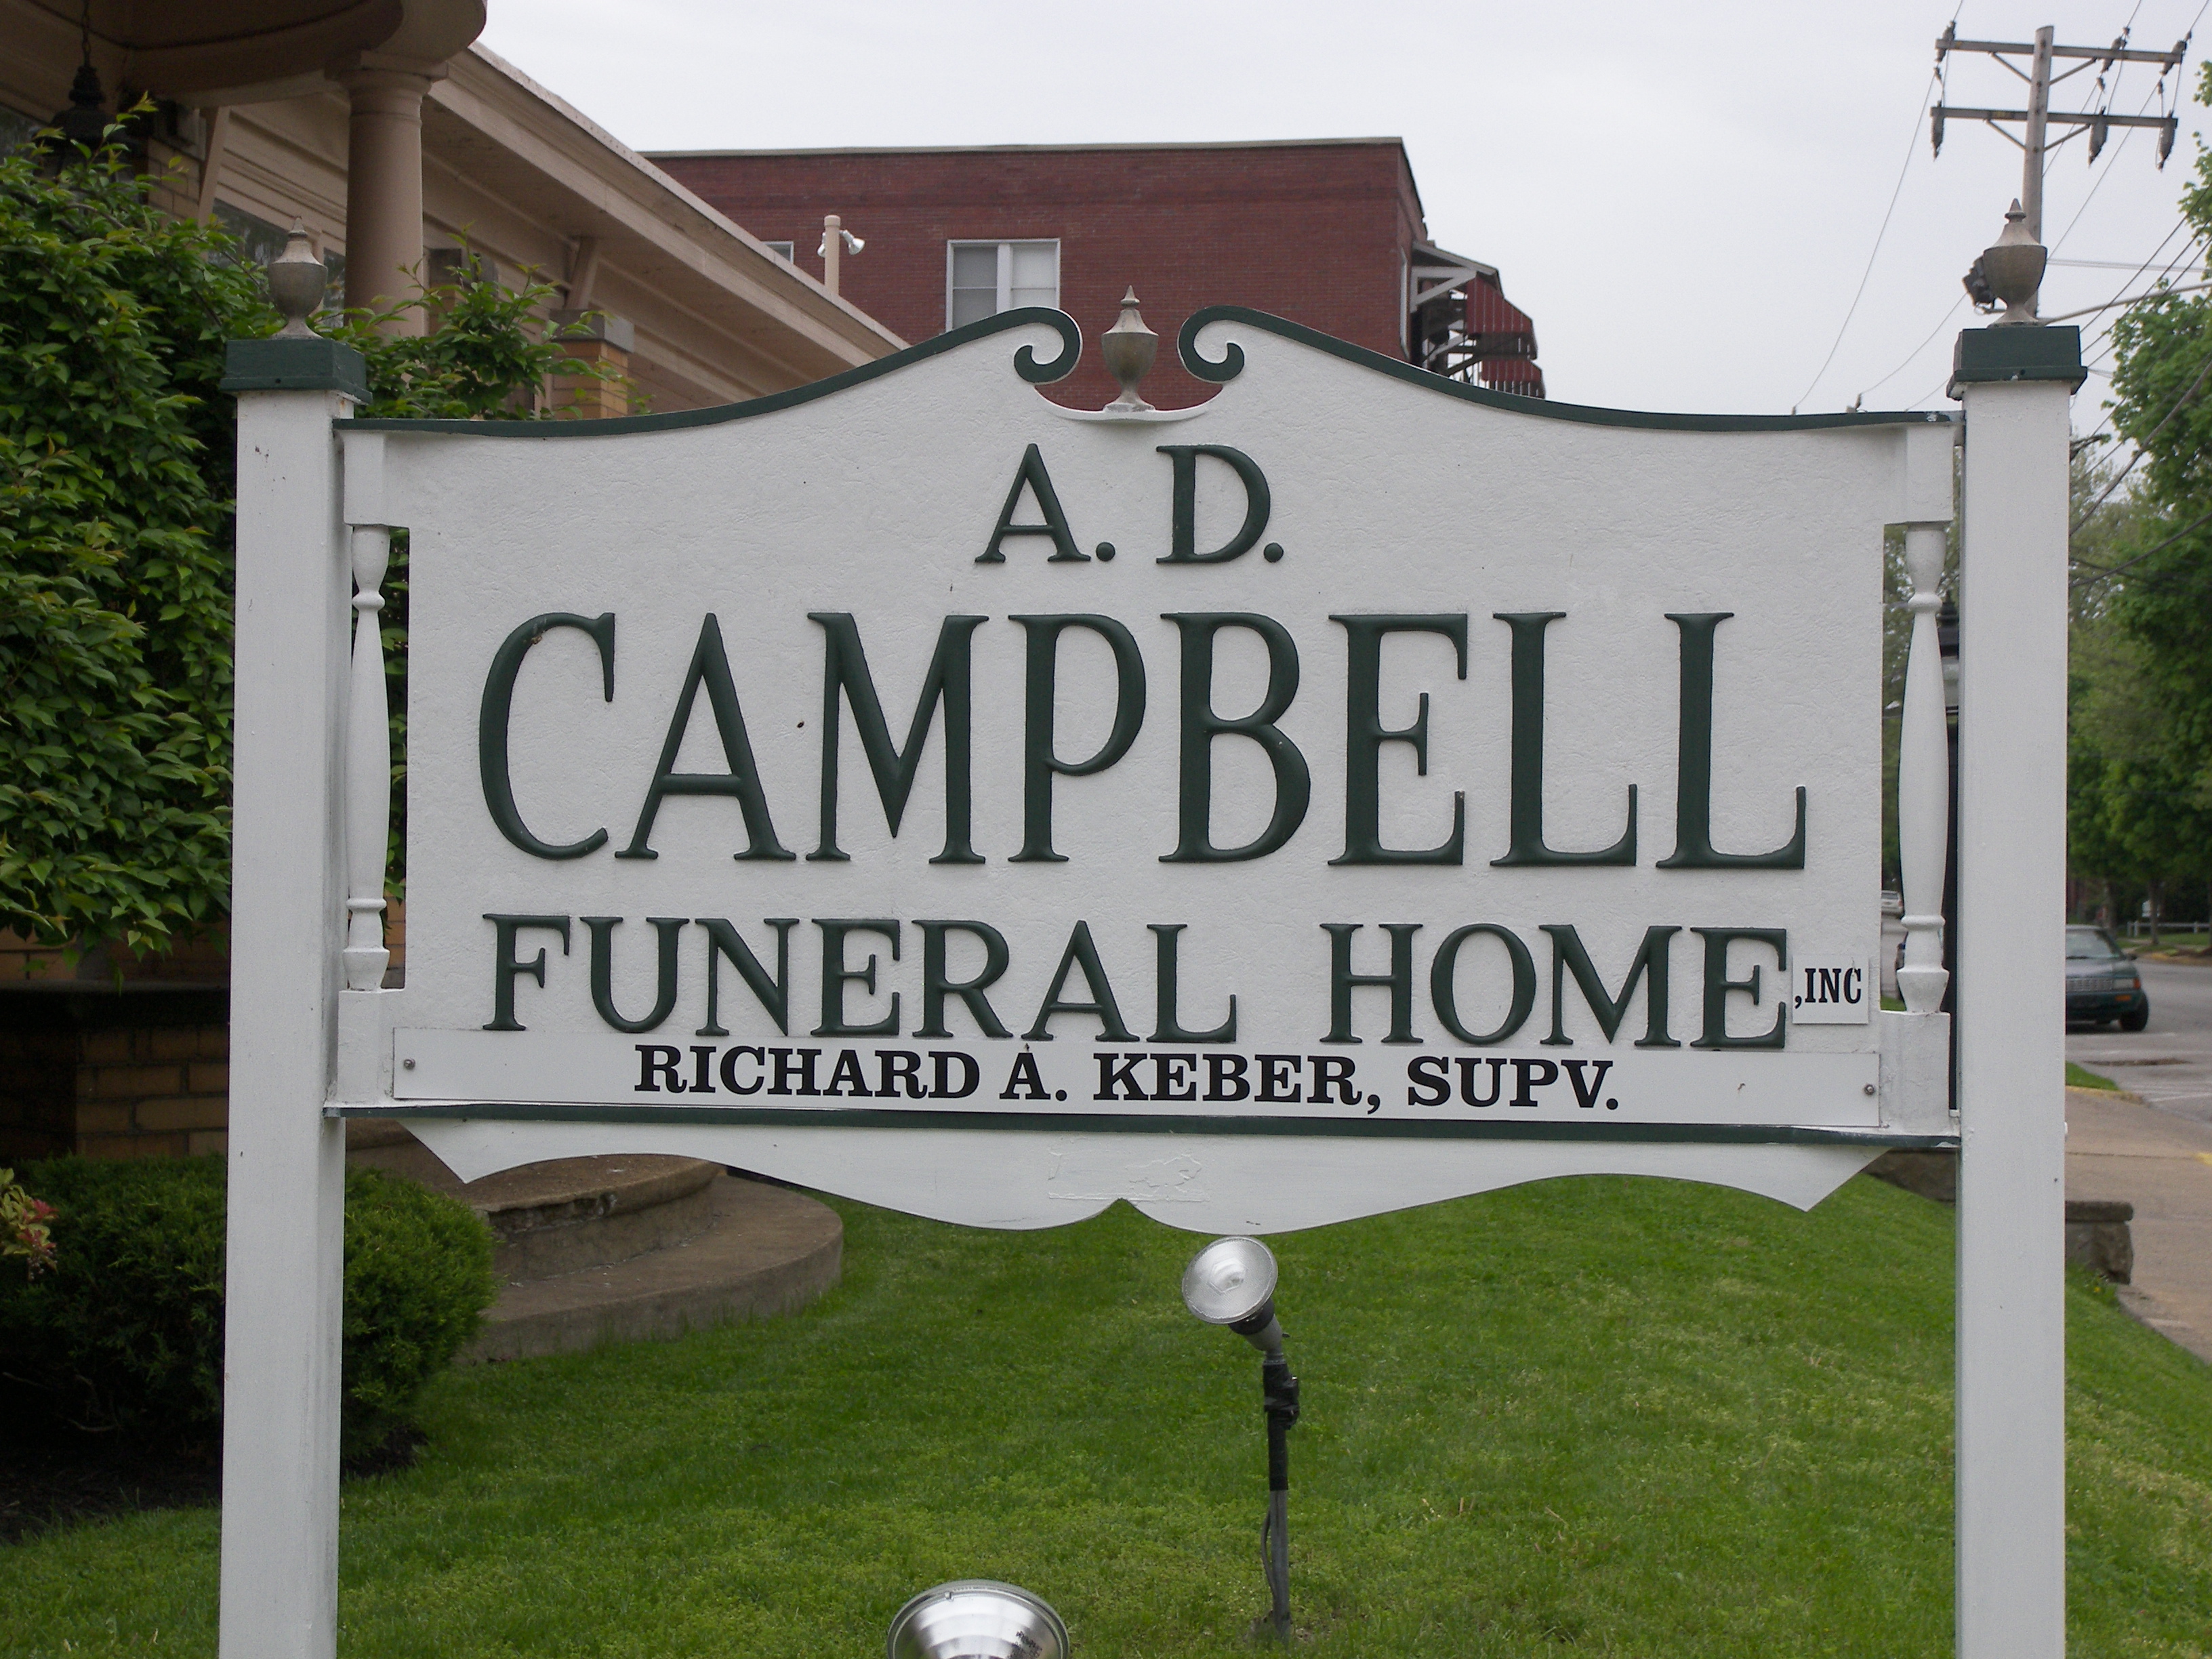 A.D. Campbell Funeral Home located in Beaver Falls PA